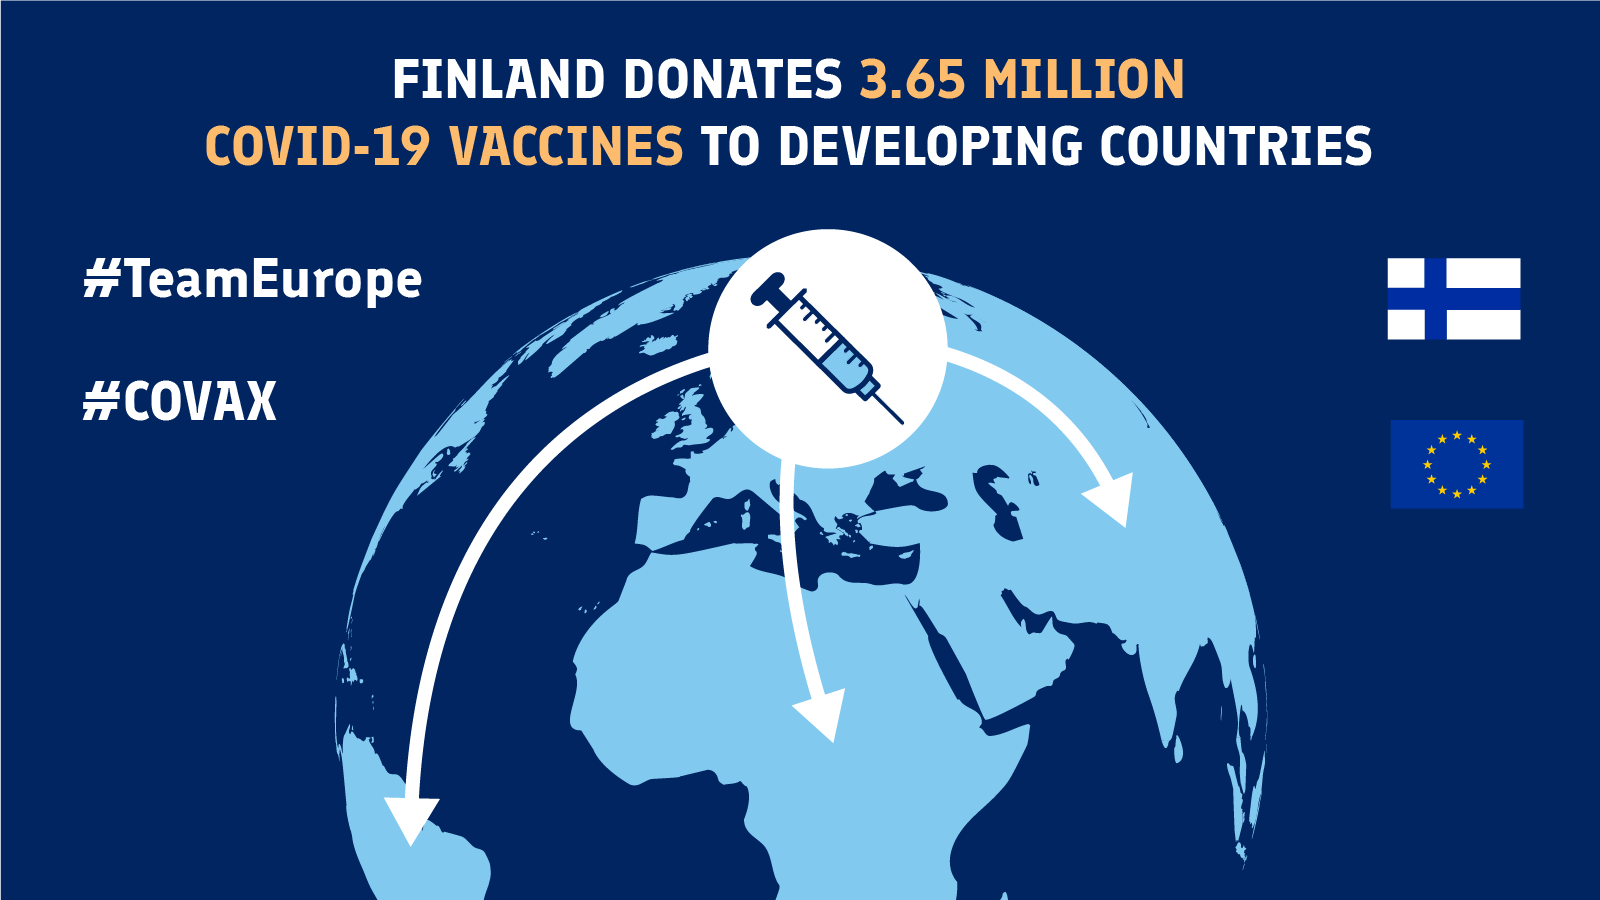 Finland donates 3, 65 million Covid-19 vaccines to developing countries.